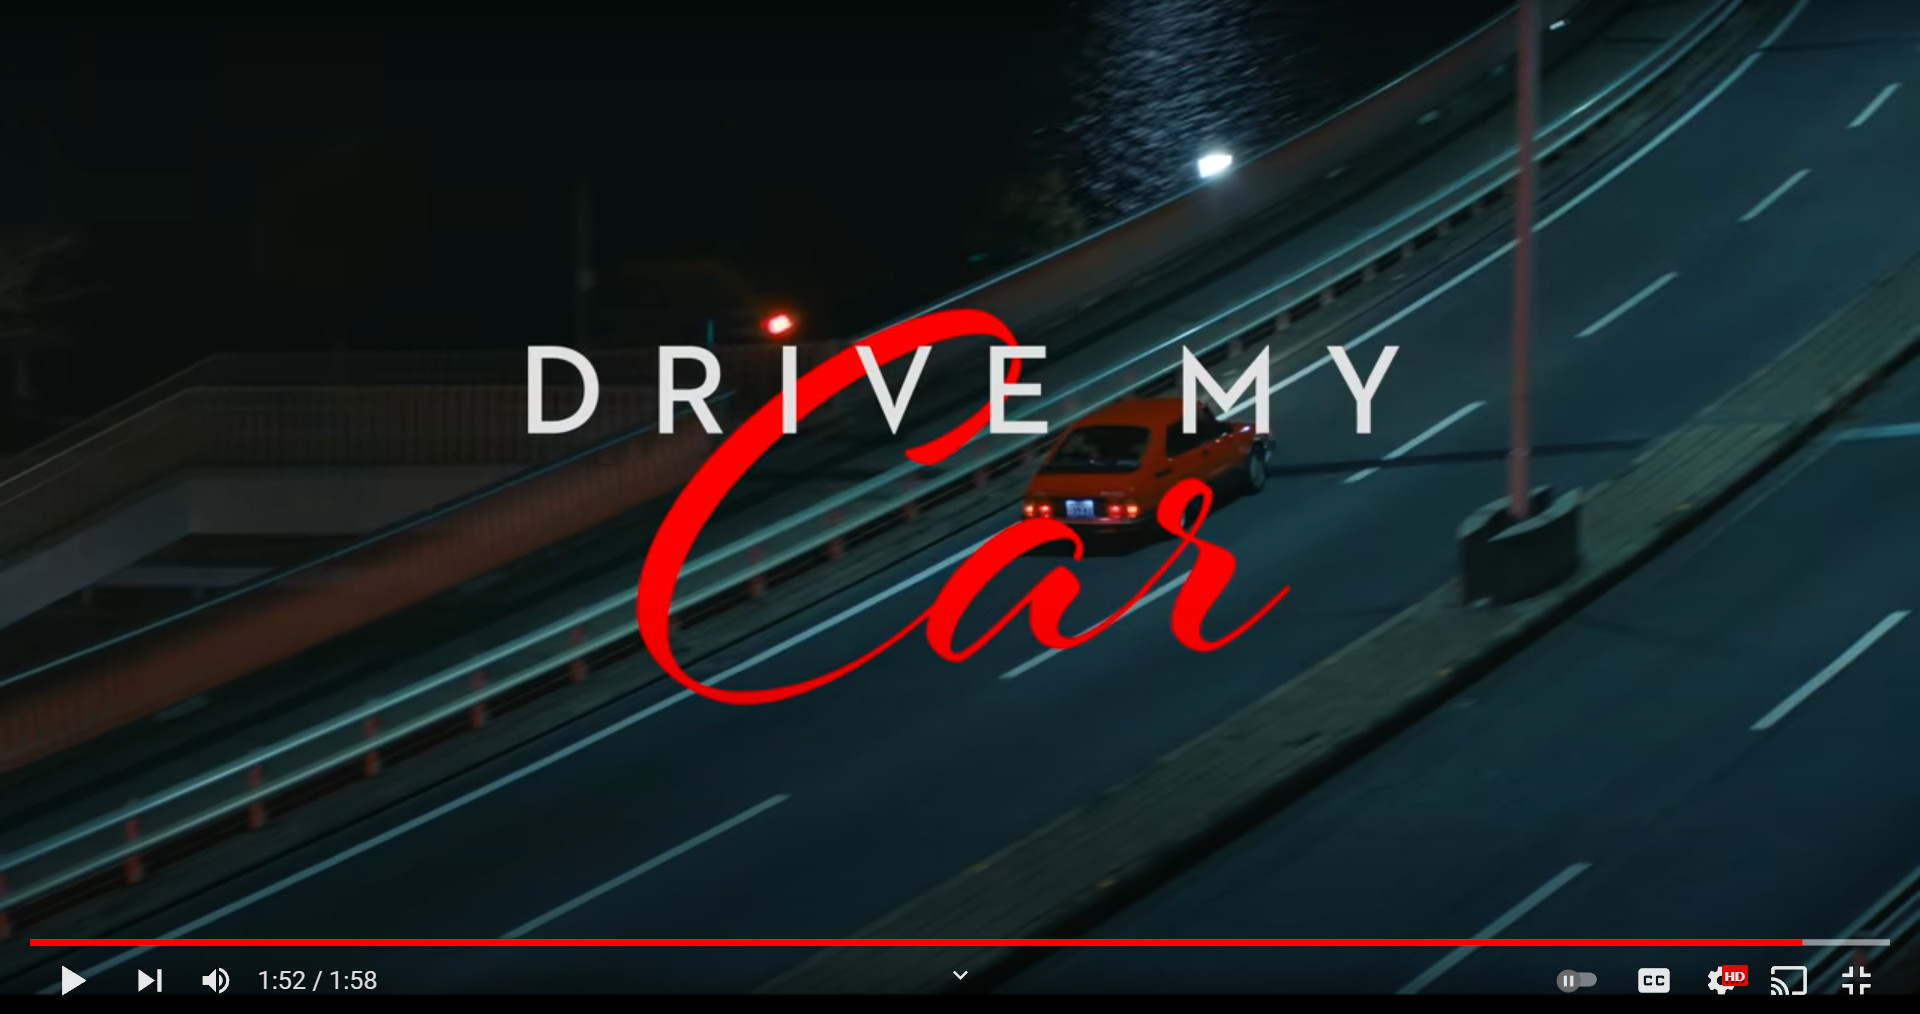 Drive My Car first Japanese film to receive